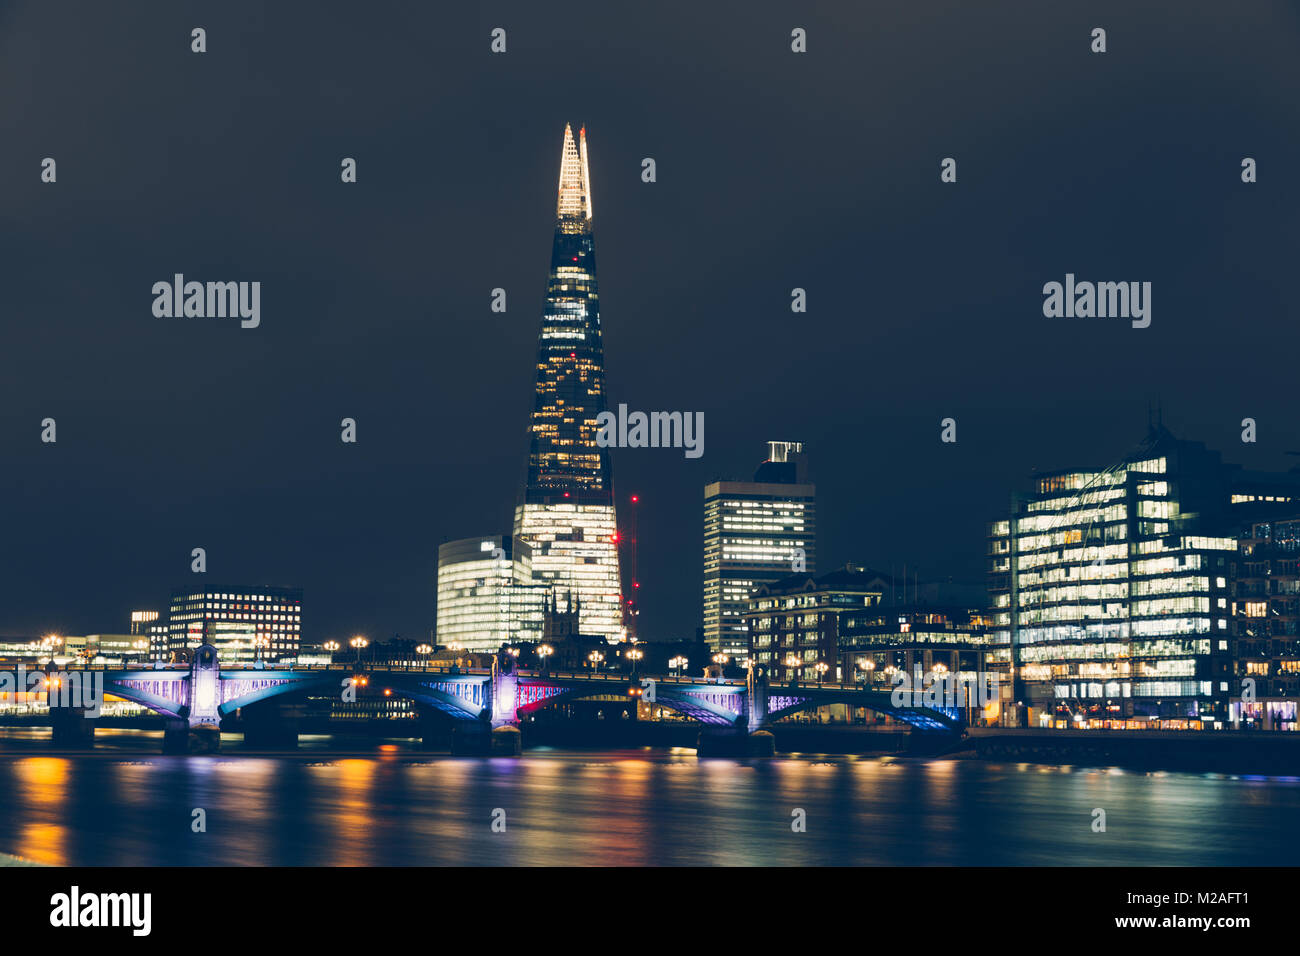 London skyline at night with shard building lights and reflections on River Thames Stock Photo